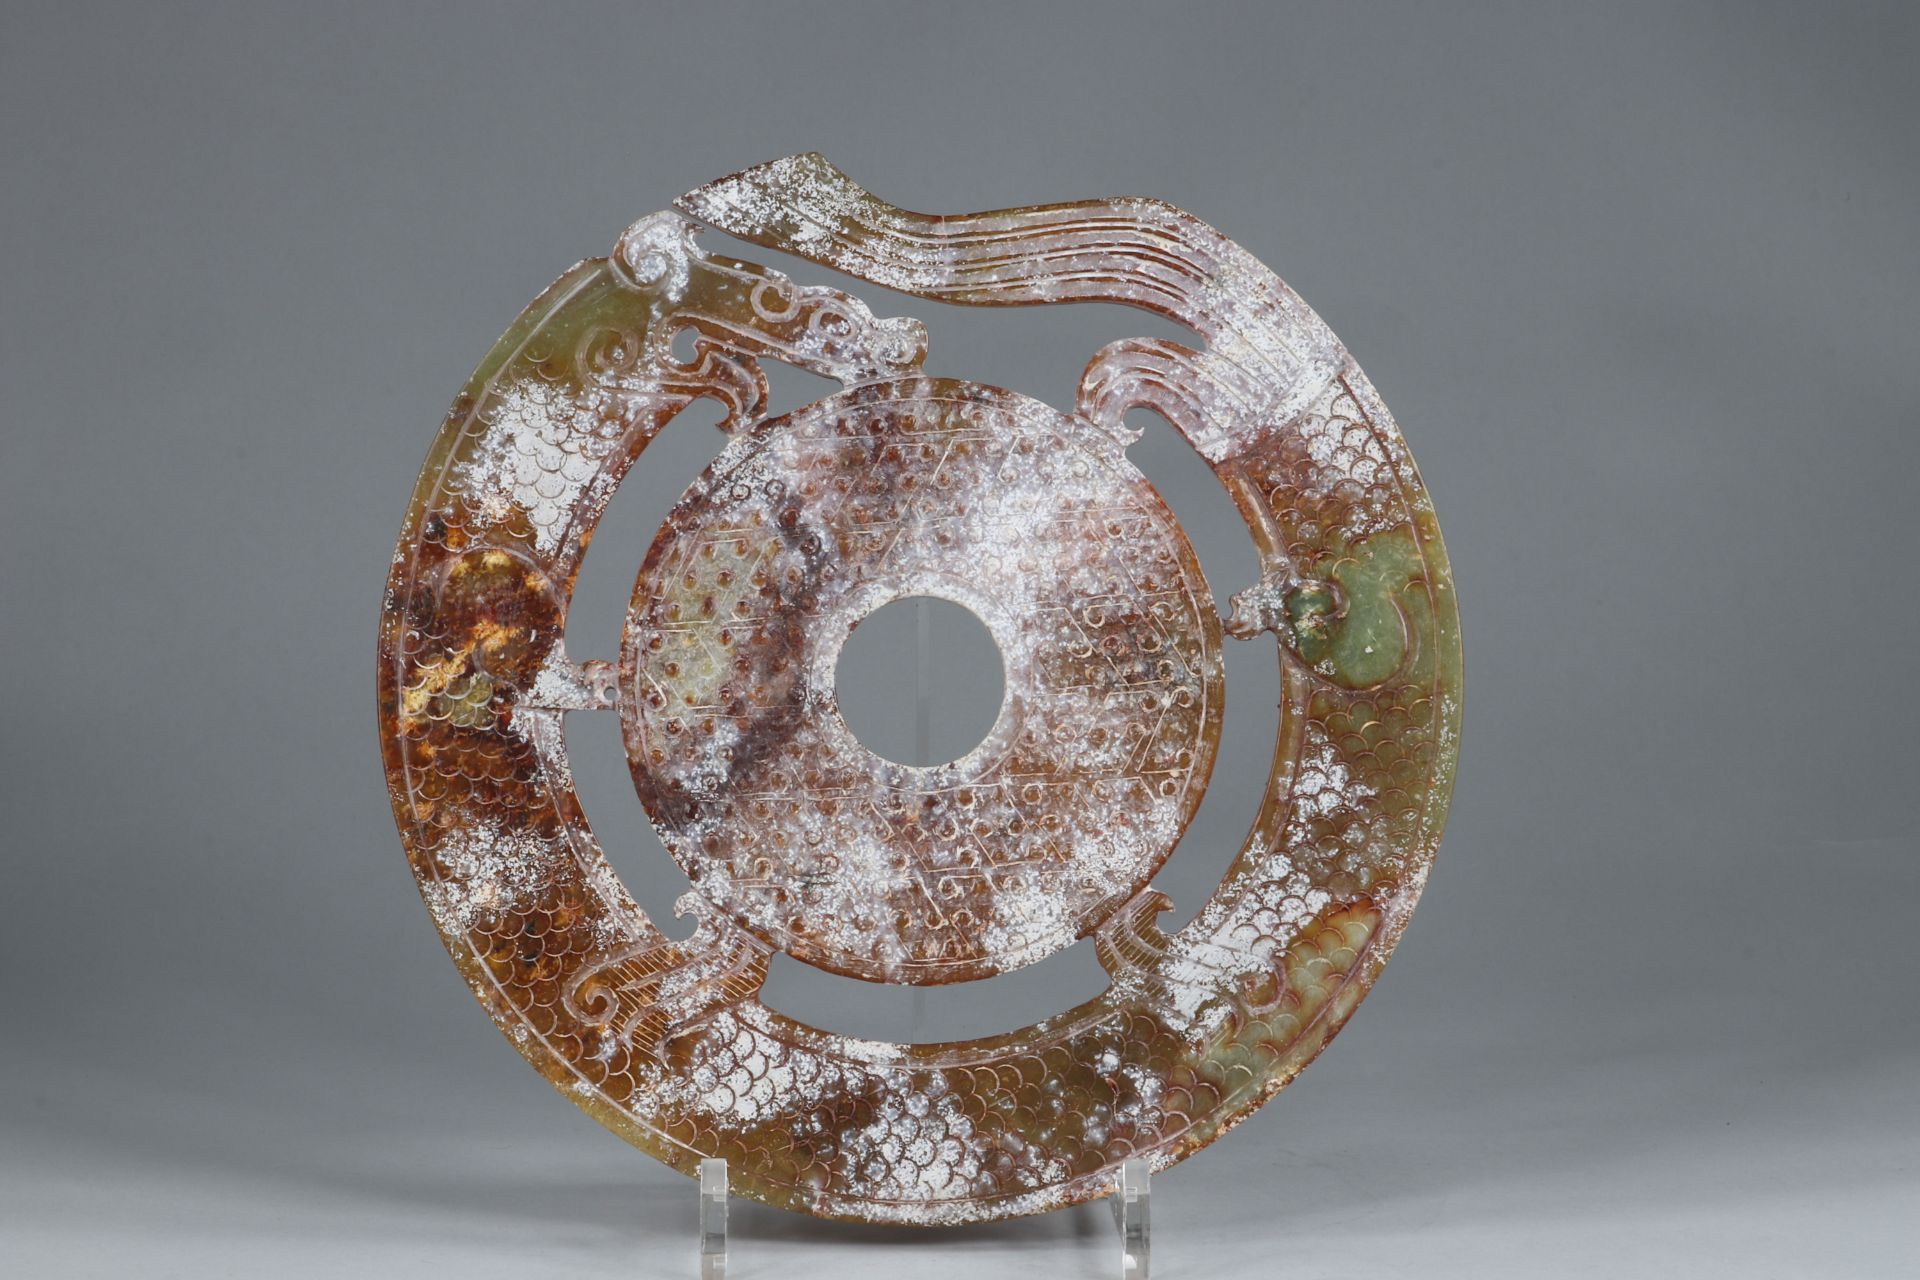 Archaic disc decorated with dragons